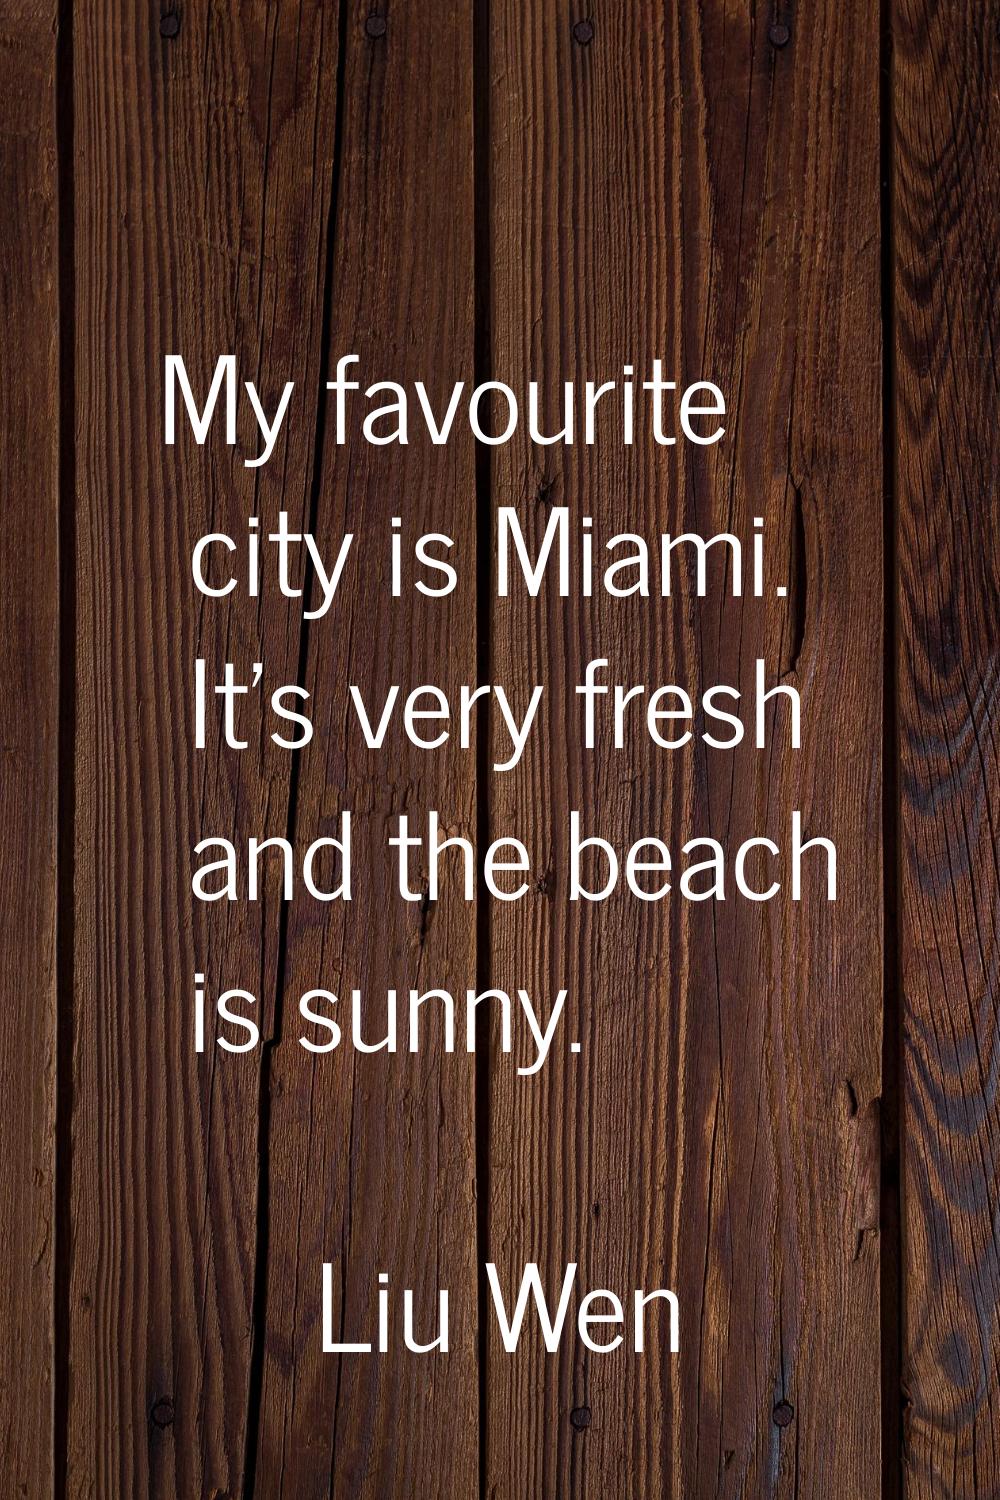 My favourite city is Miami. It's very fresh and the beach is sunny.